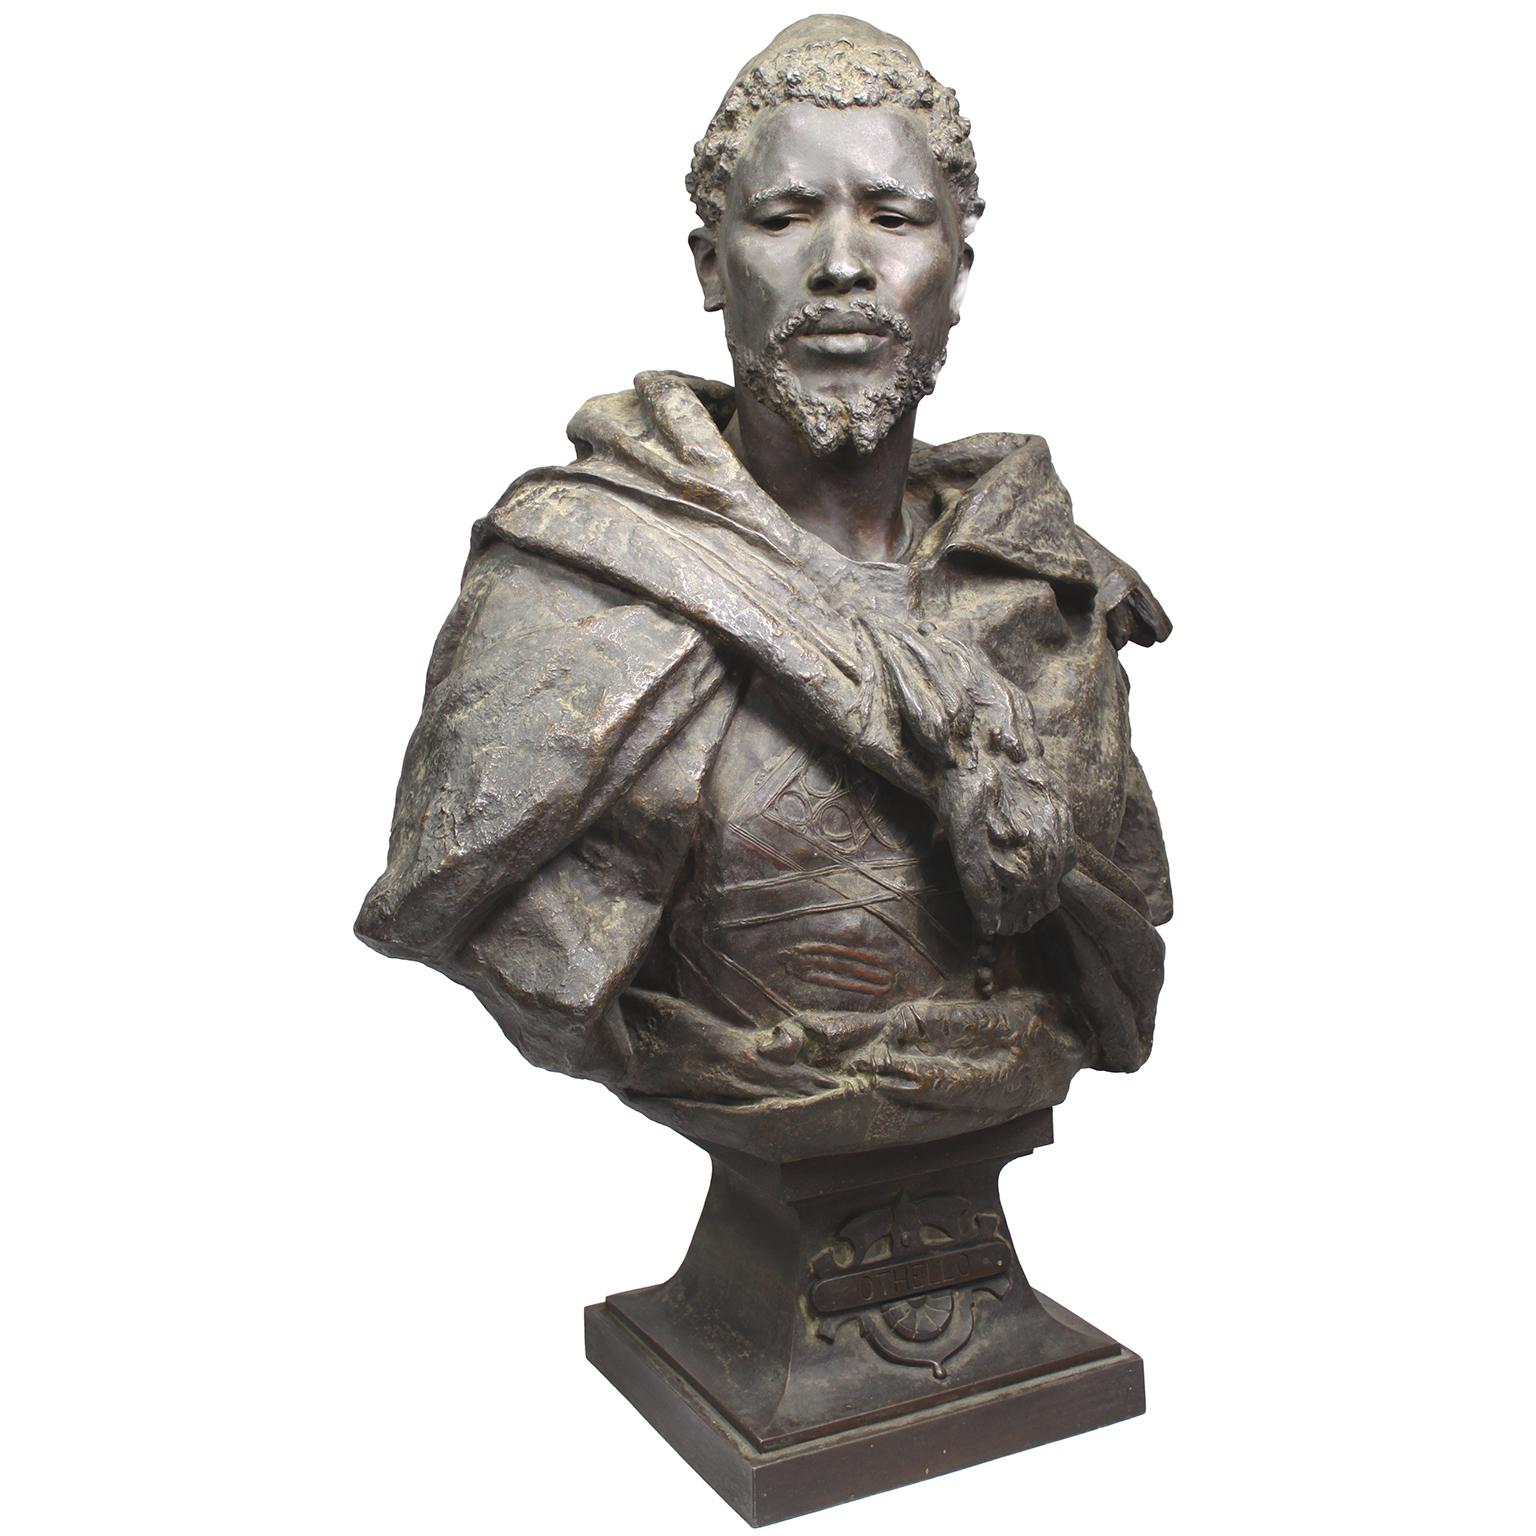 A large and impressive French 19th century life-size bust depicting Othello, the North African Moor of Venice character in the 1603 play written by William Shakespeare (1564-1616), after the model by Gaston Veuvenot Leroux (French, 1854-1942). The